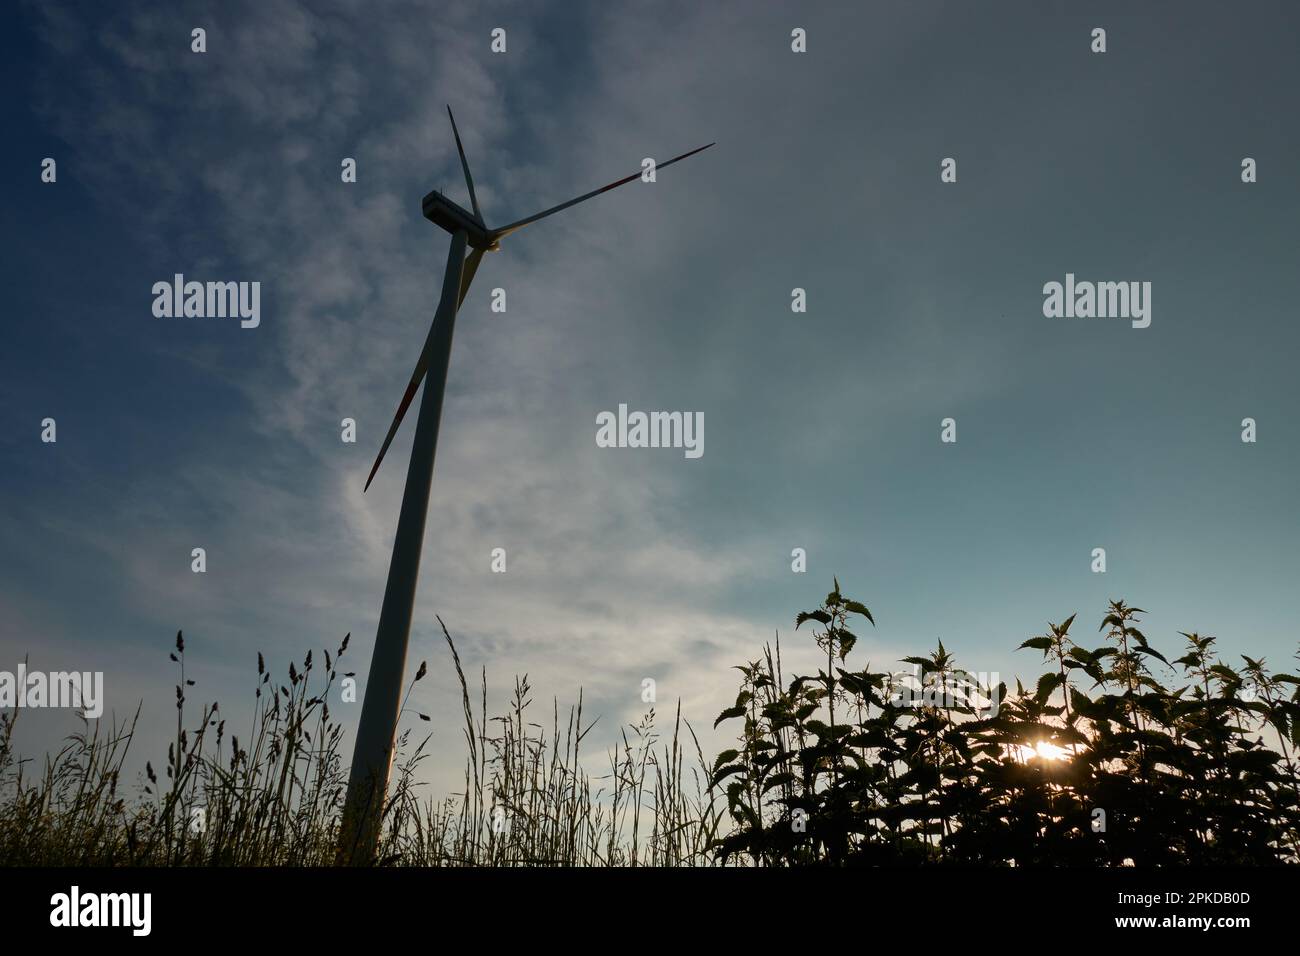 1 Wind turbine next to a dark storm cloud. Setting sun shines through nettles. Low angle view. From behind. Stock Photo